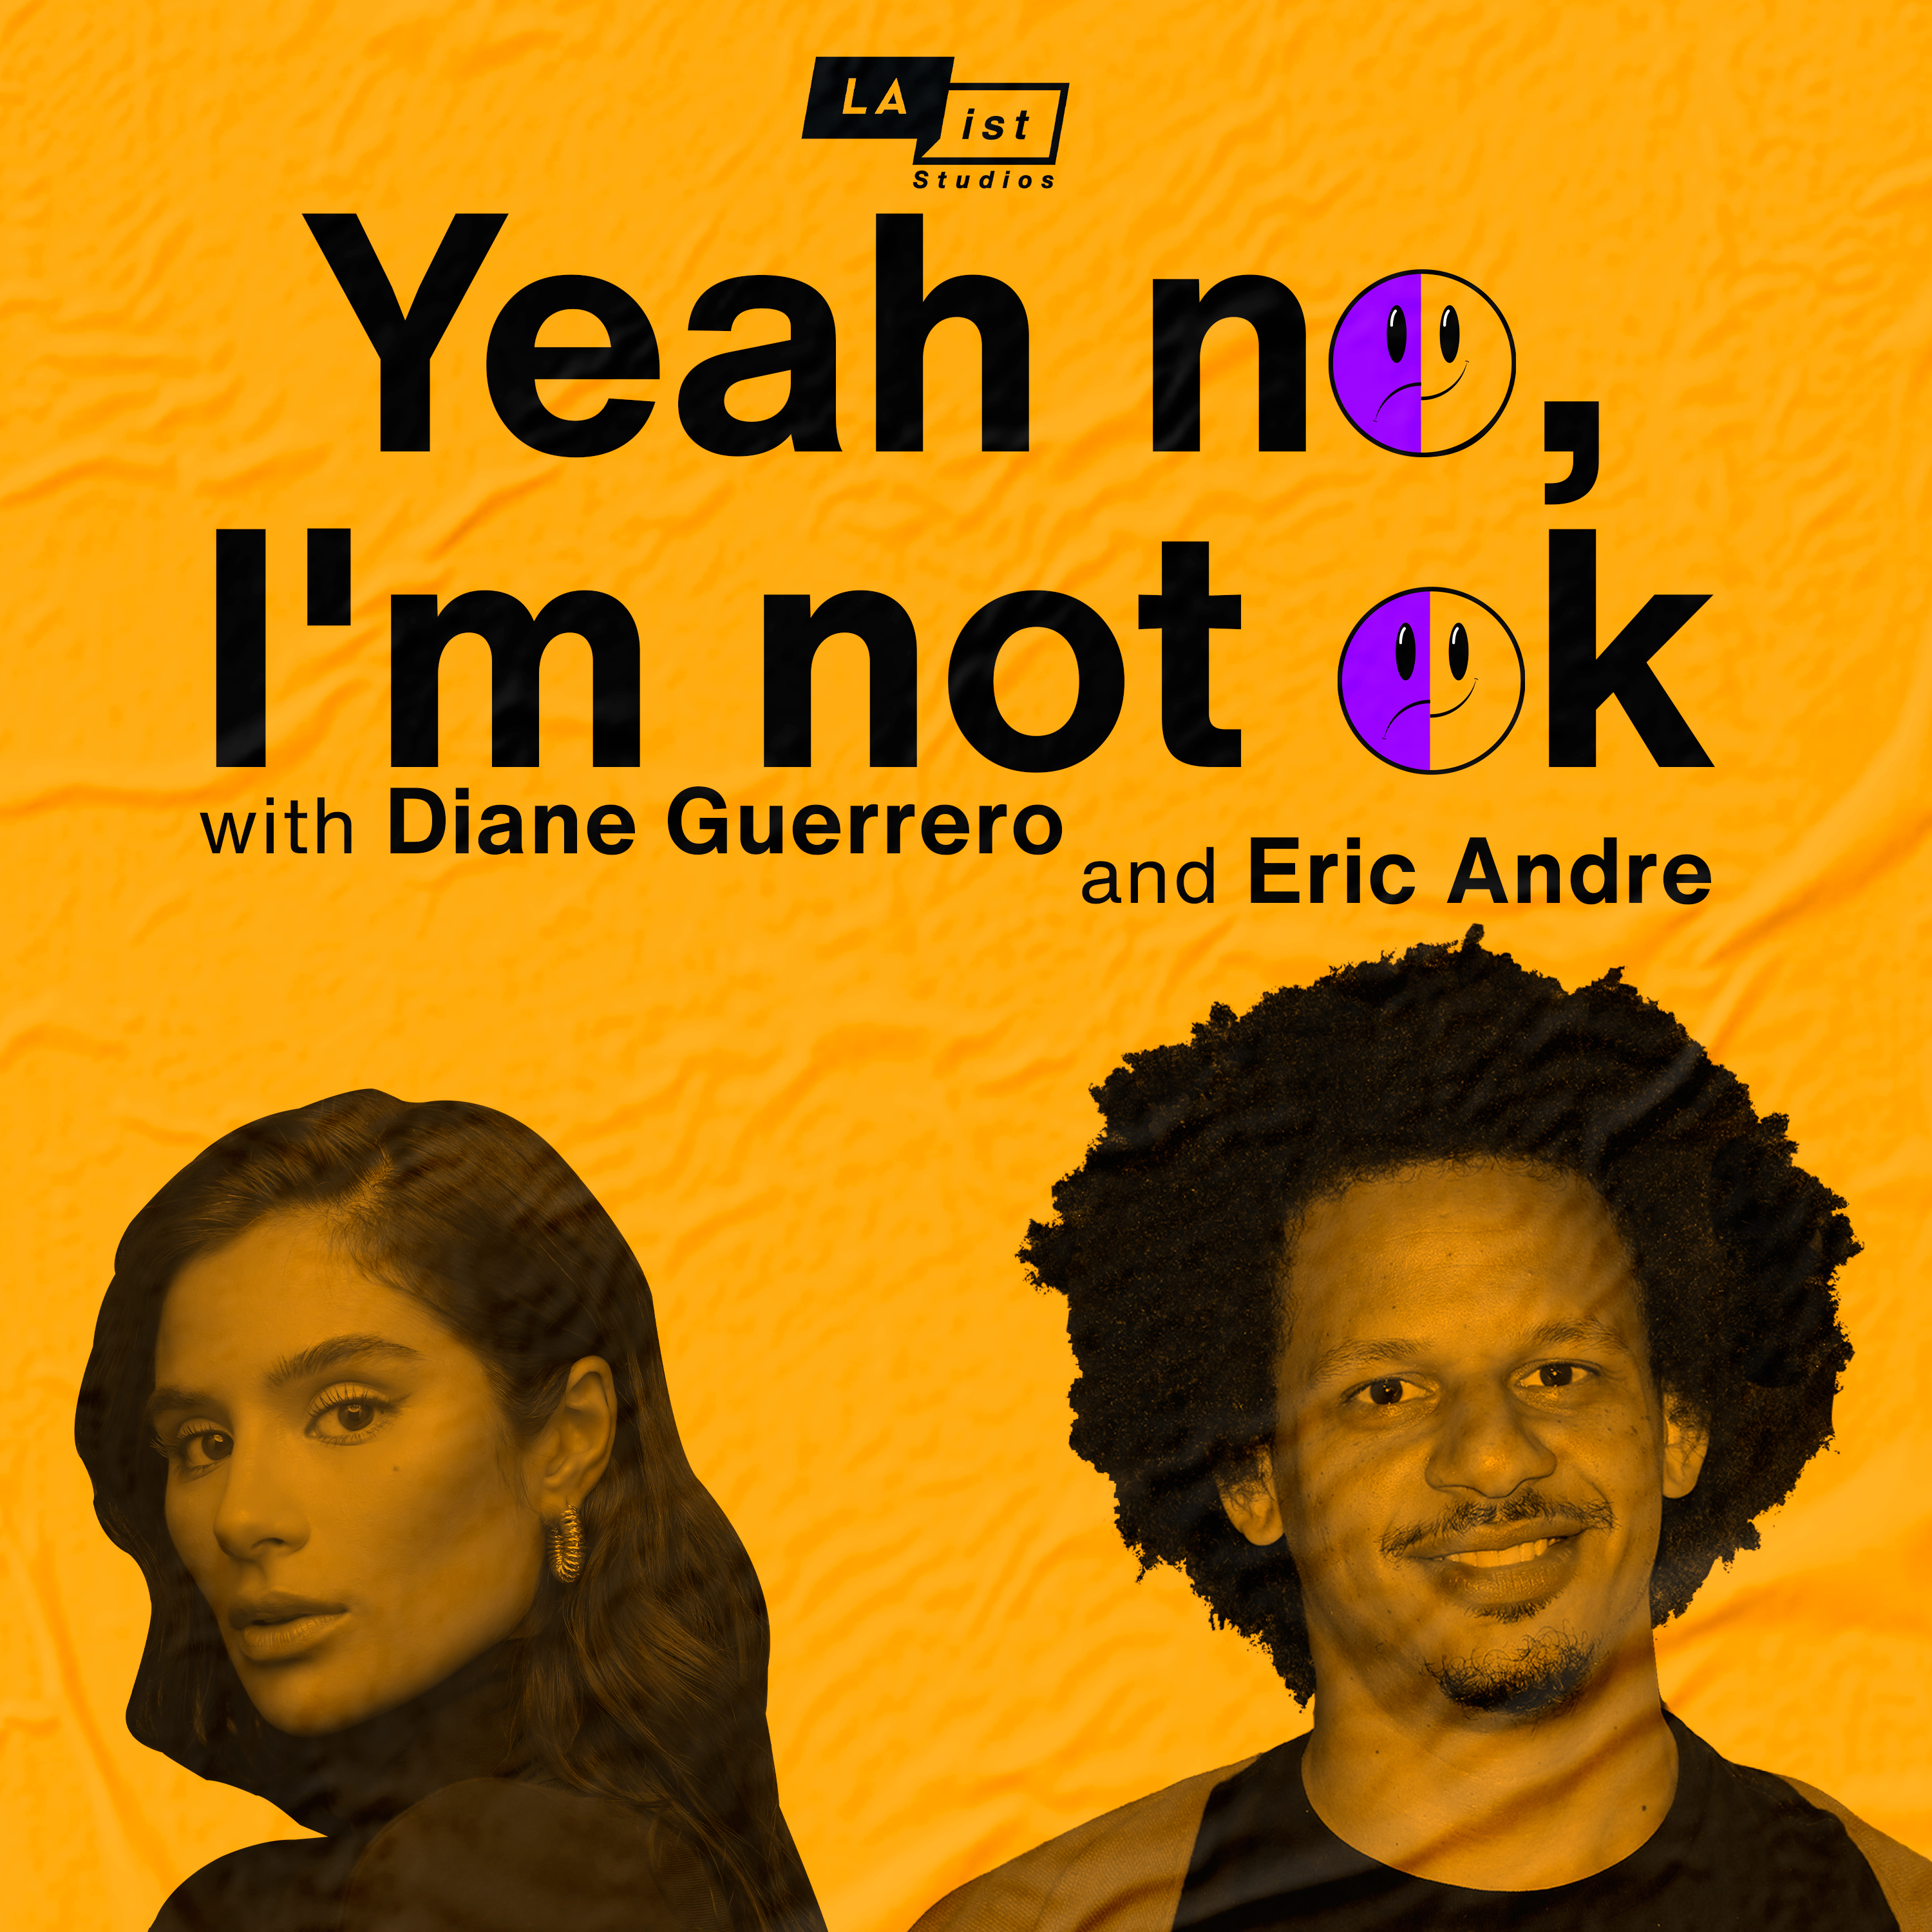 Eric Andre Wants You to Take Care of Yourself, Silly